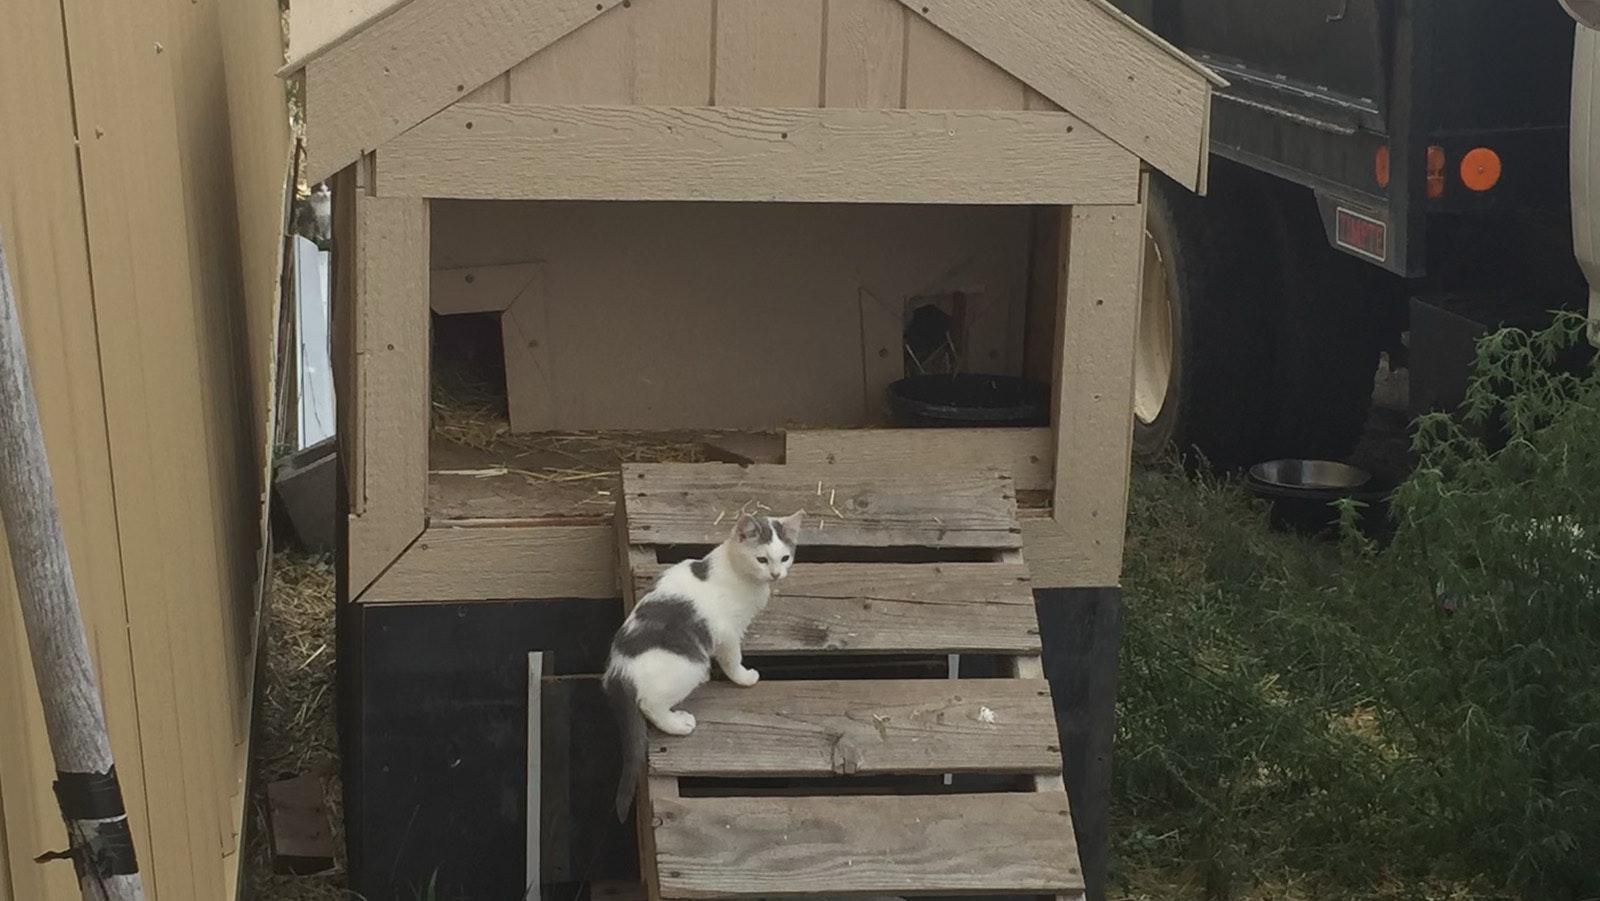 Scott Smith has shelters for barn cats on his rural property near Casper. He gives the cats food and water in exchange for them eliminating vermin.